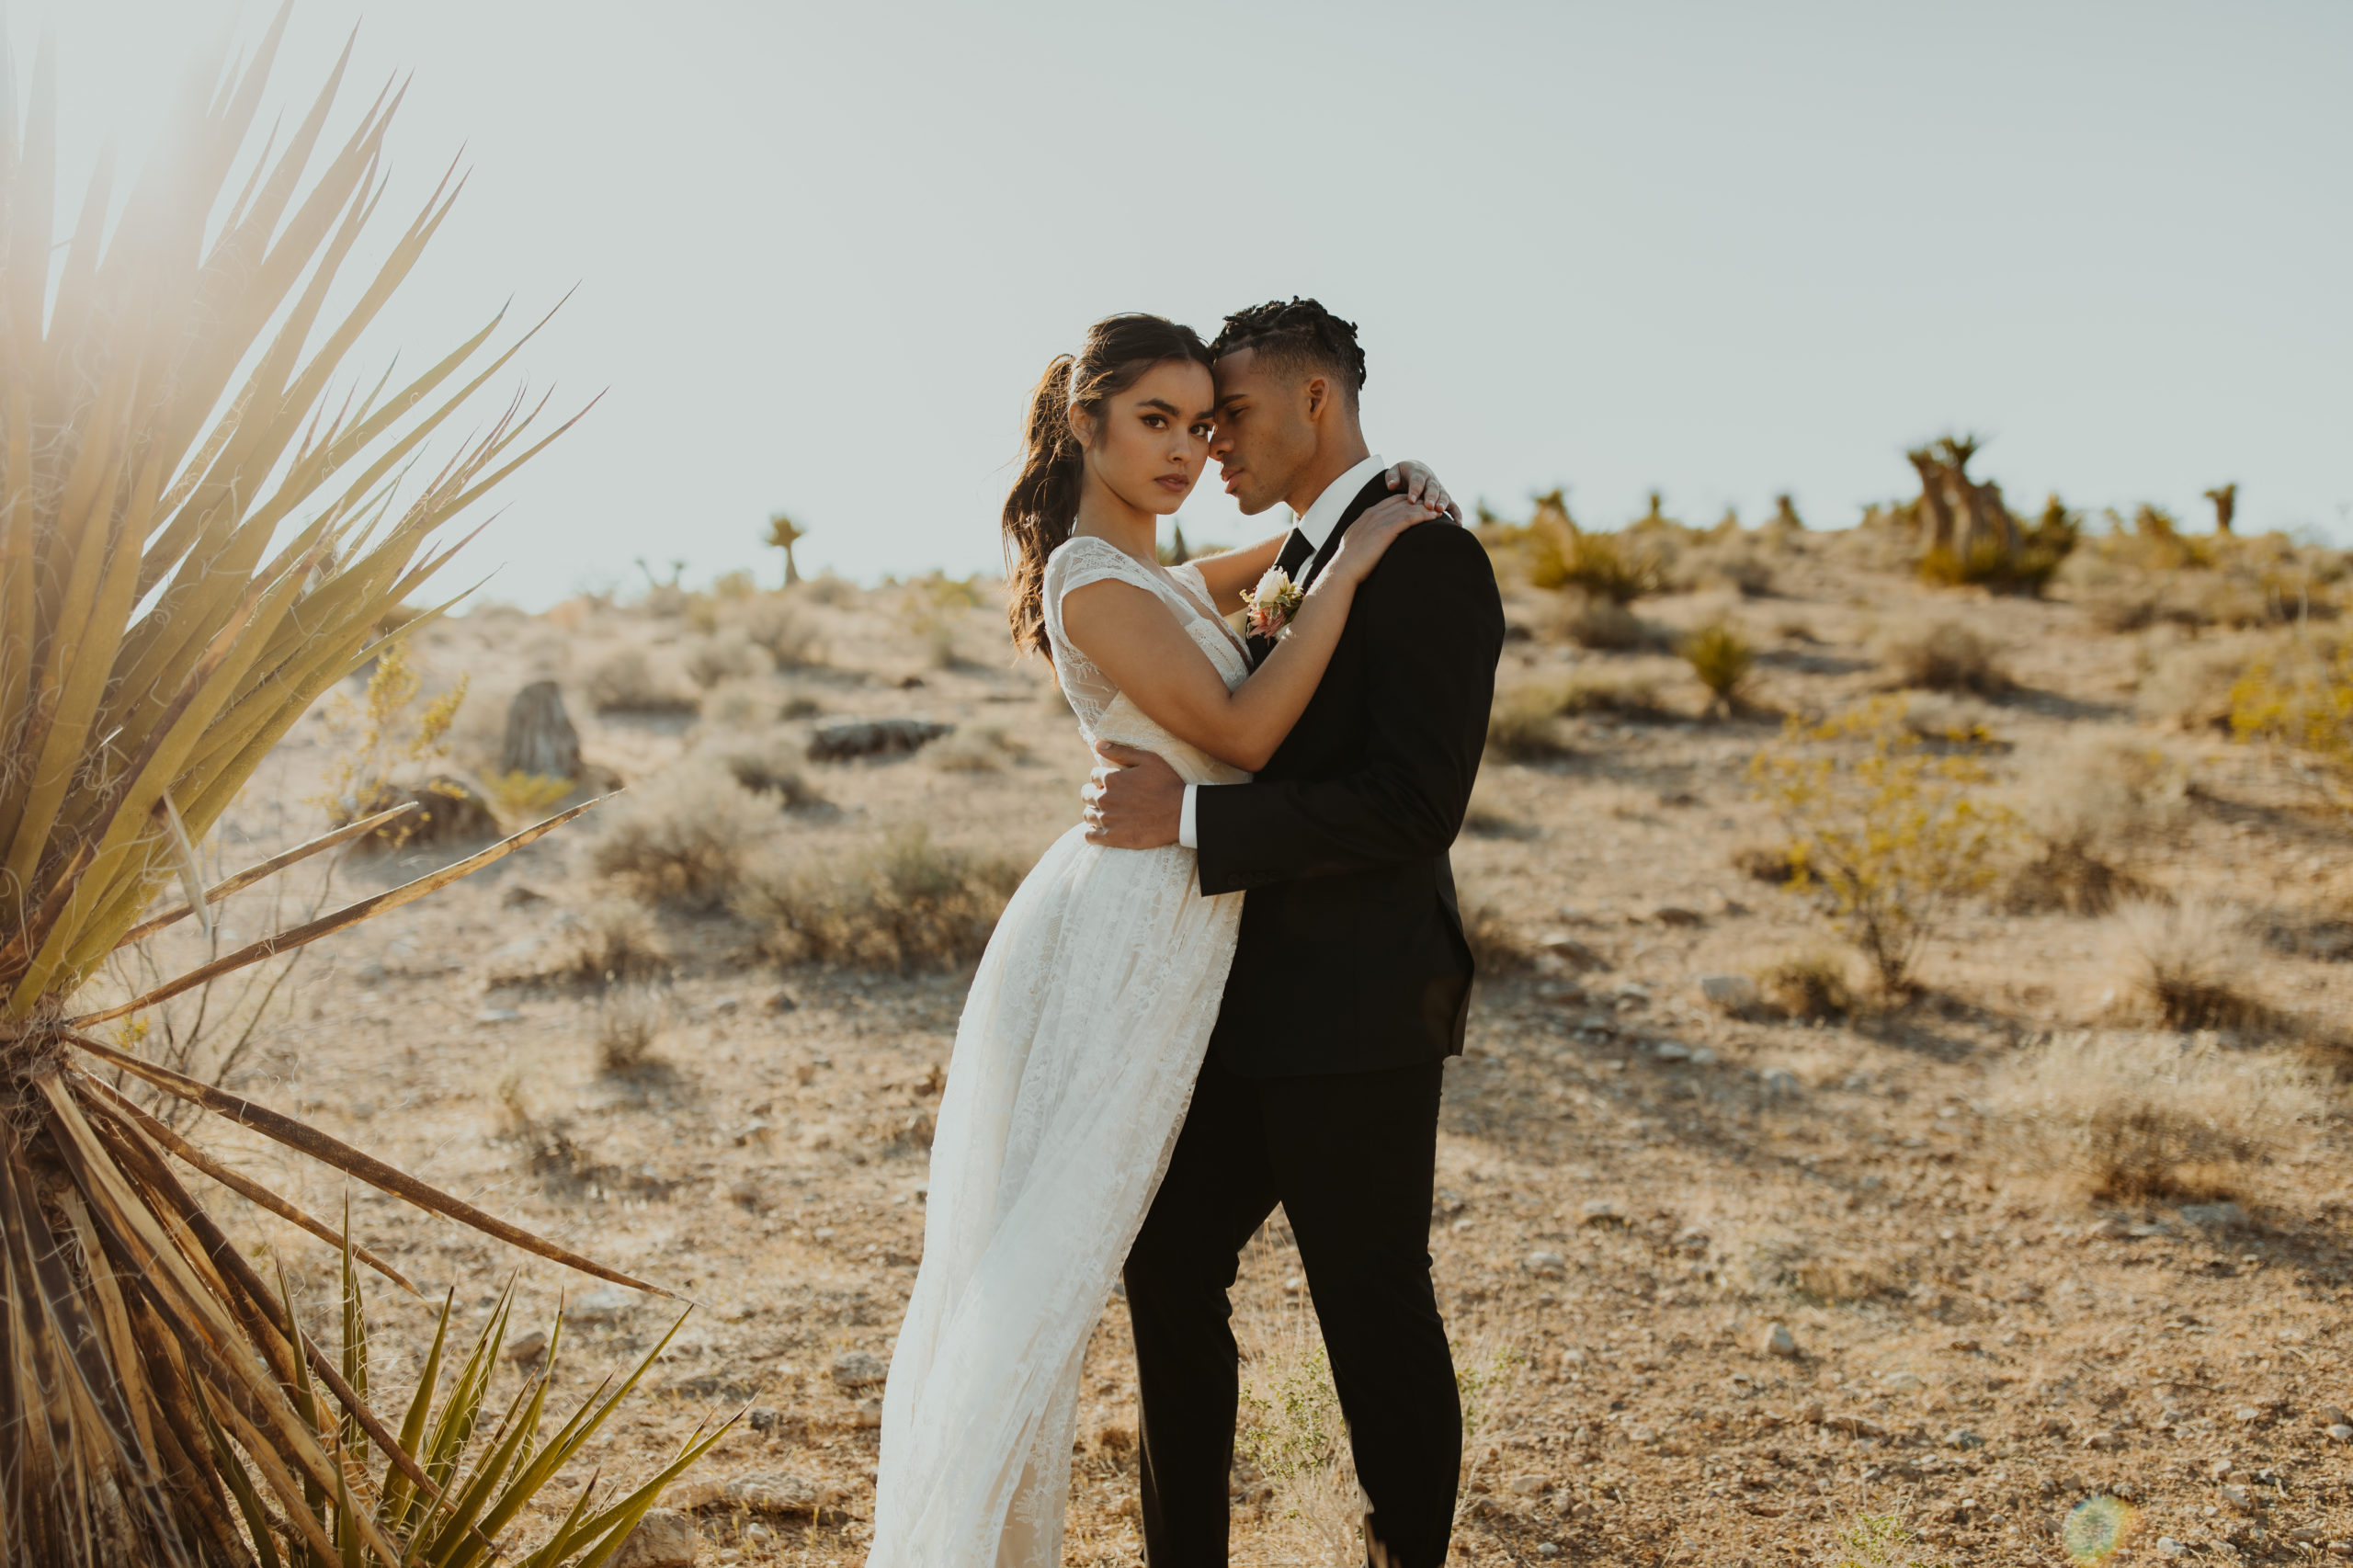 Desert elopement couple with plants in the corner of the landscape